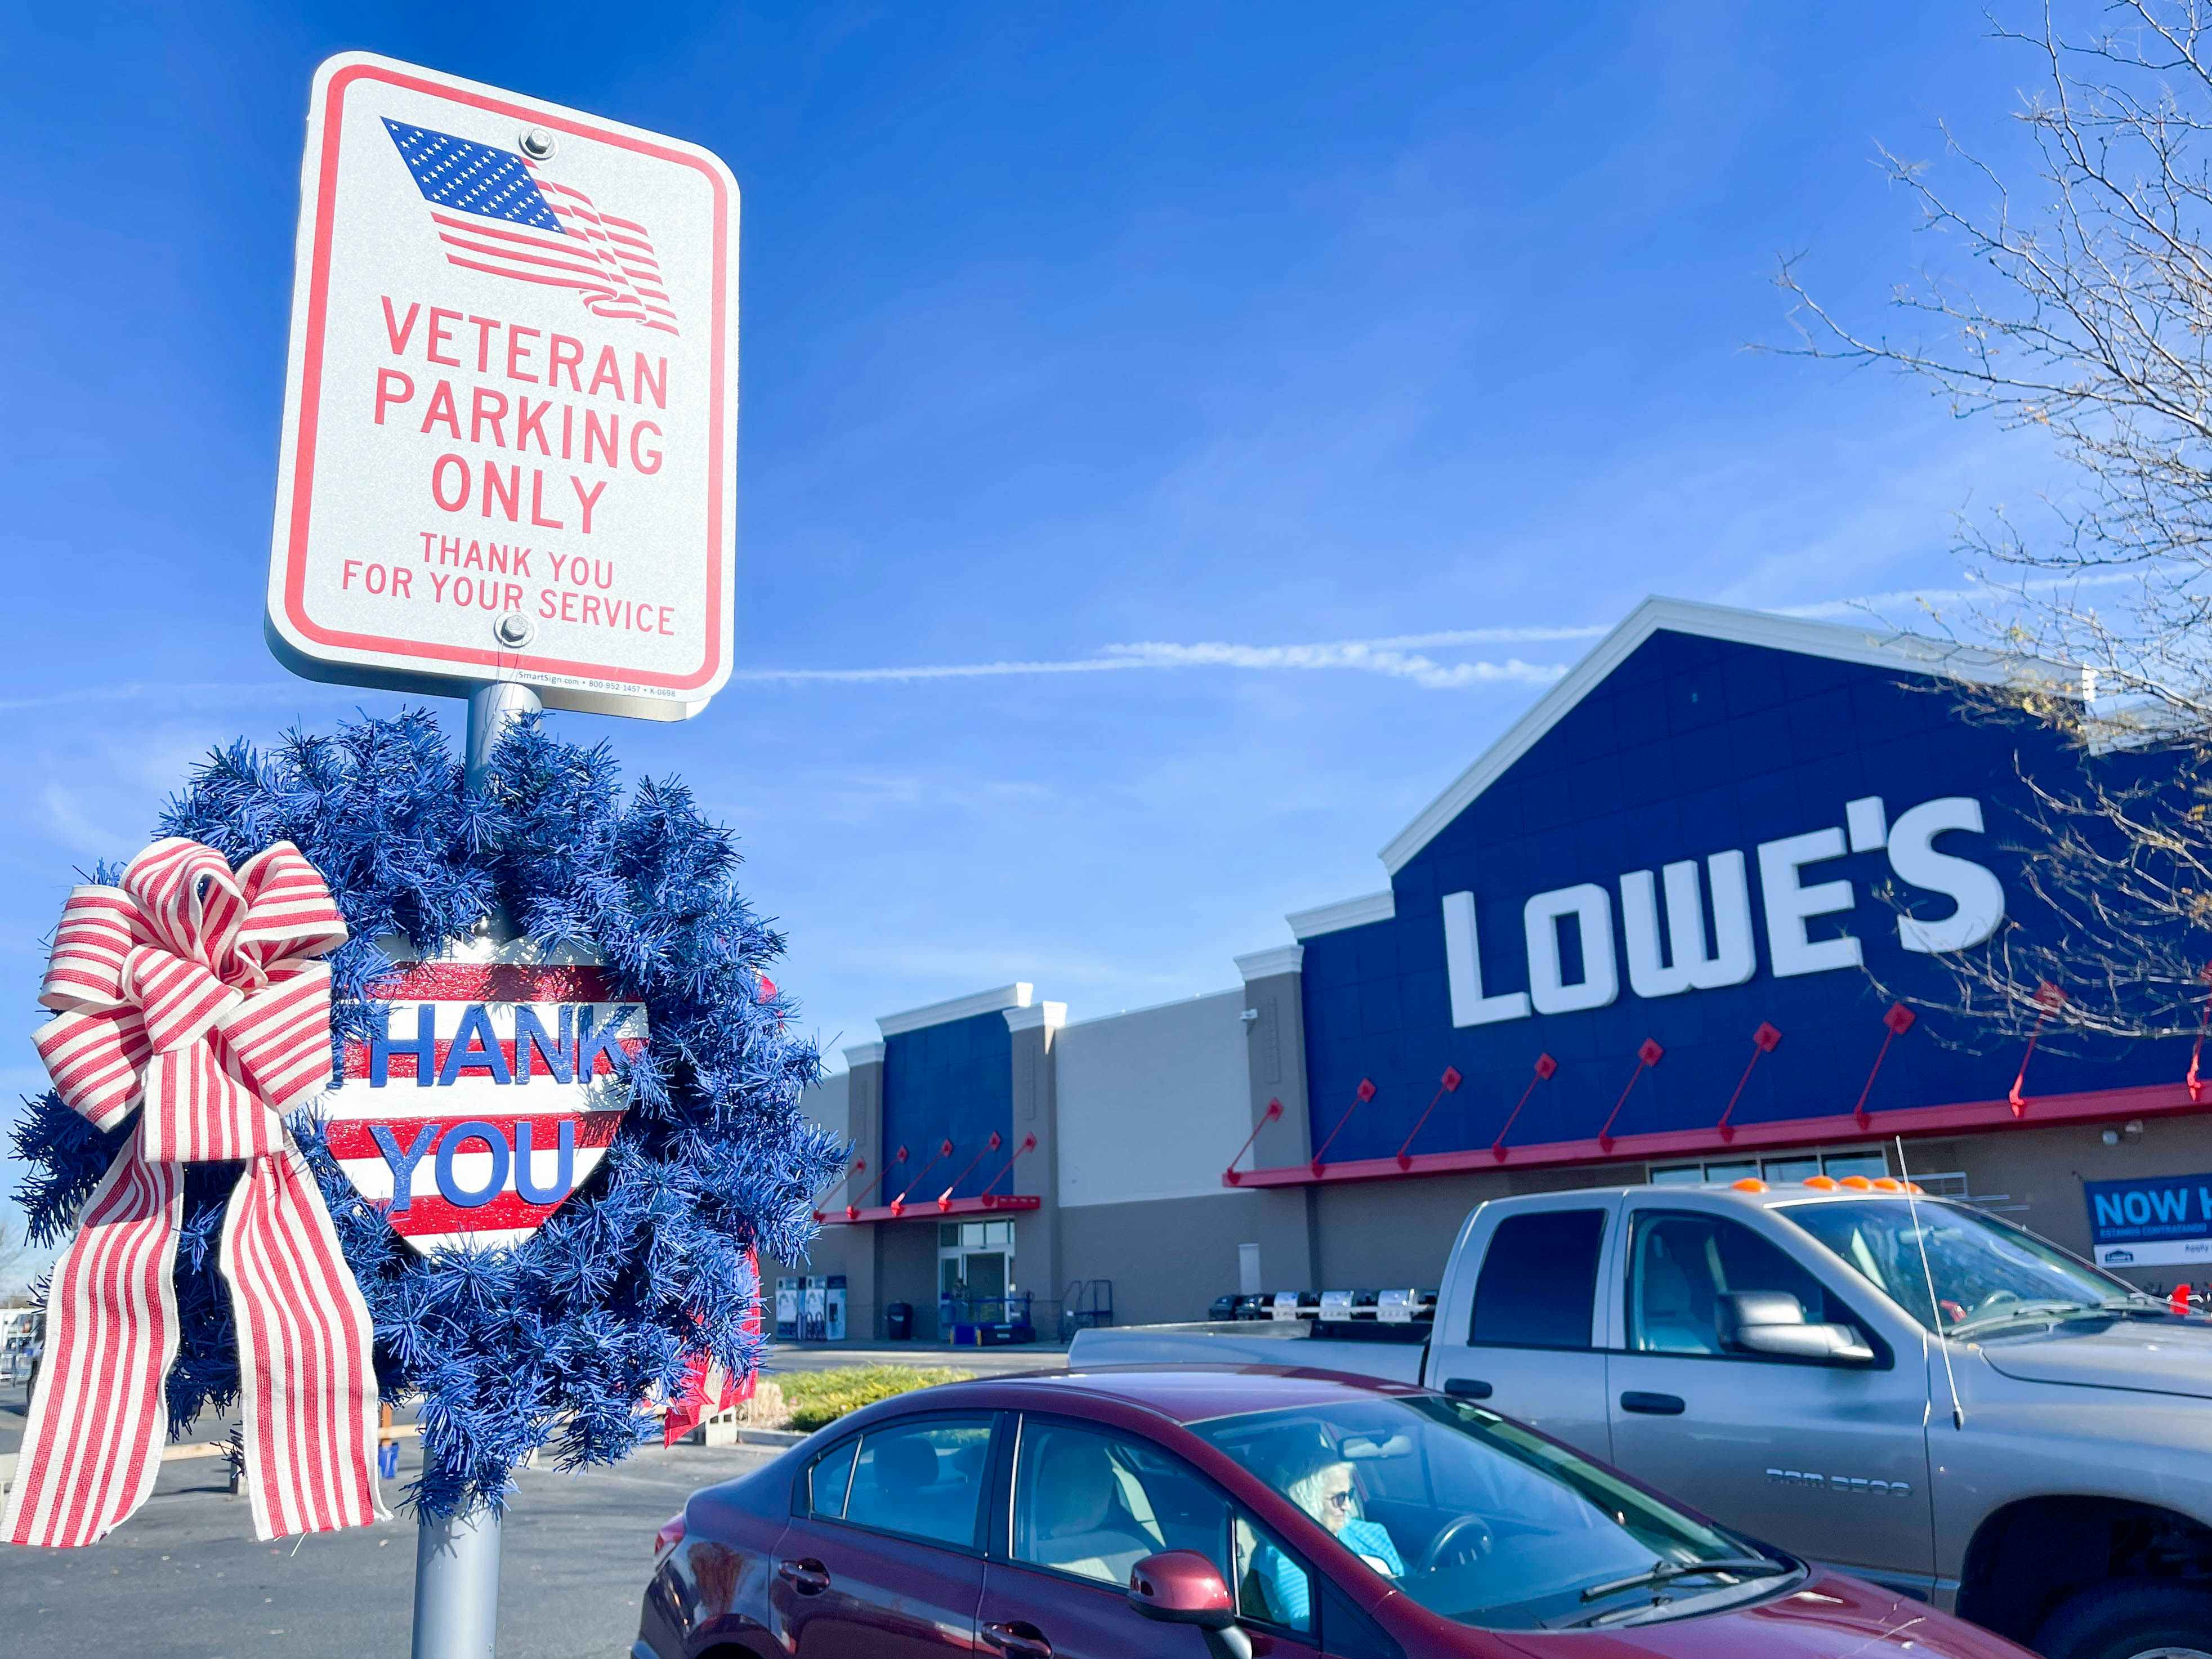 Lowes veterans military parking signs